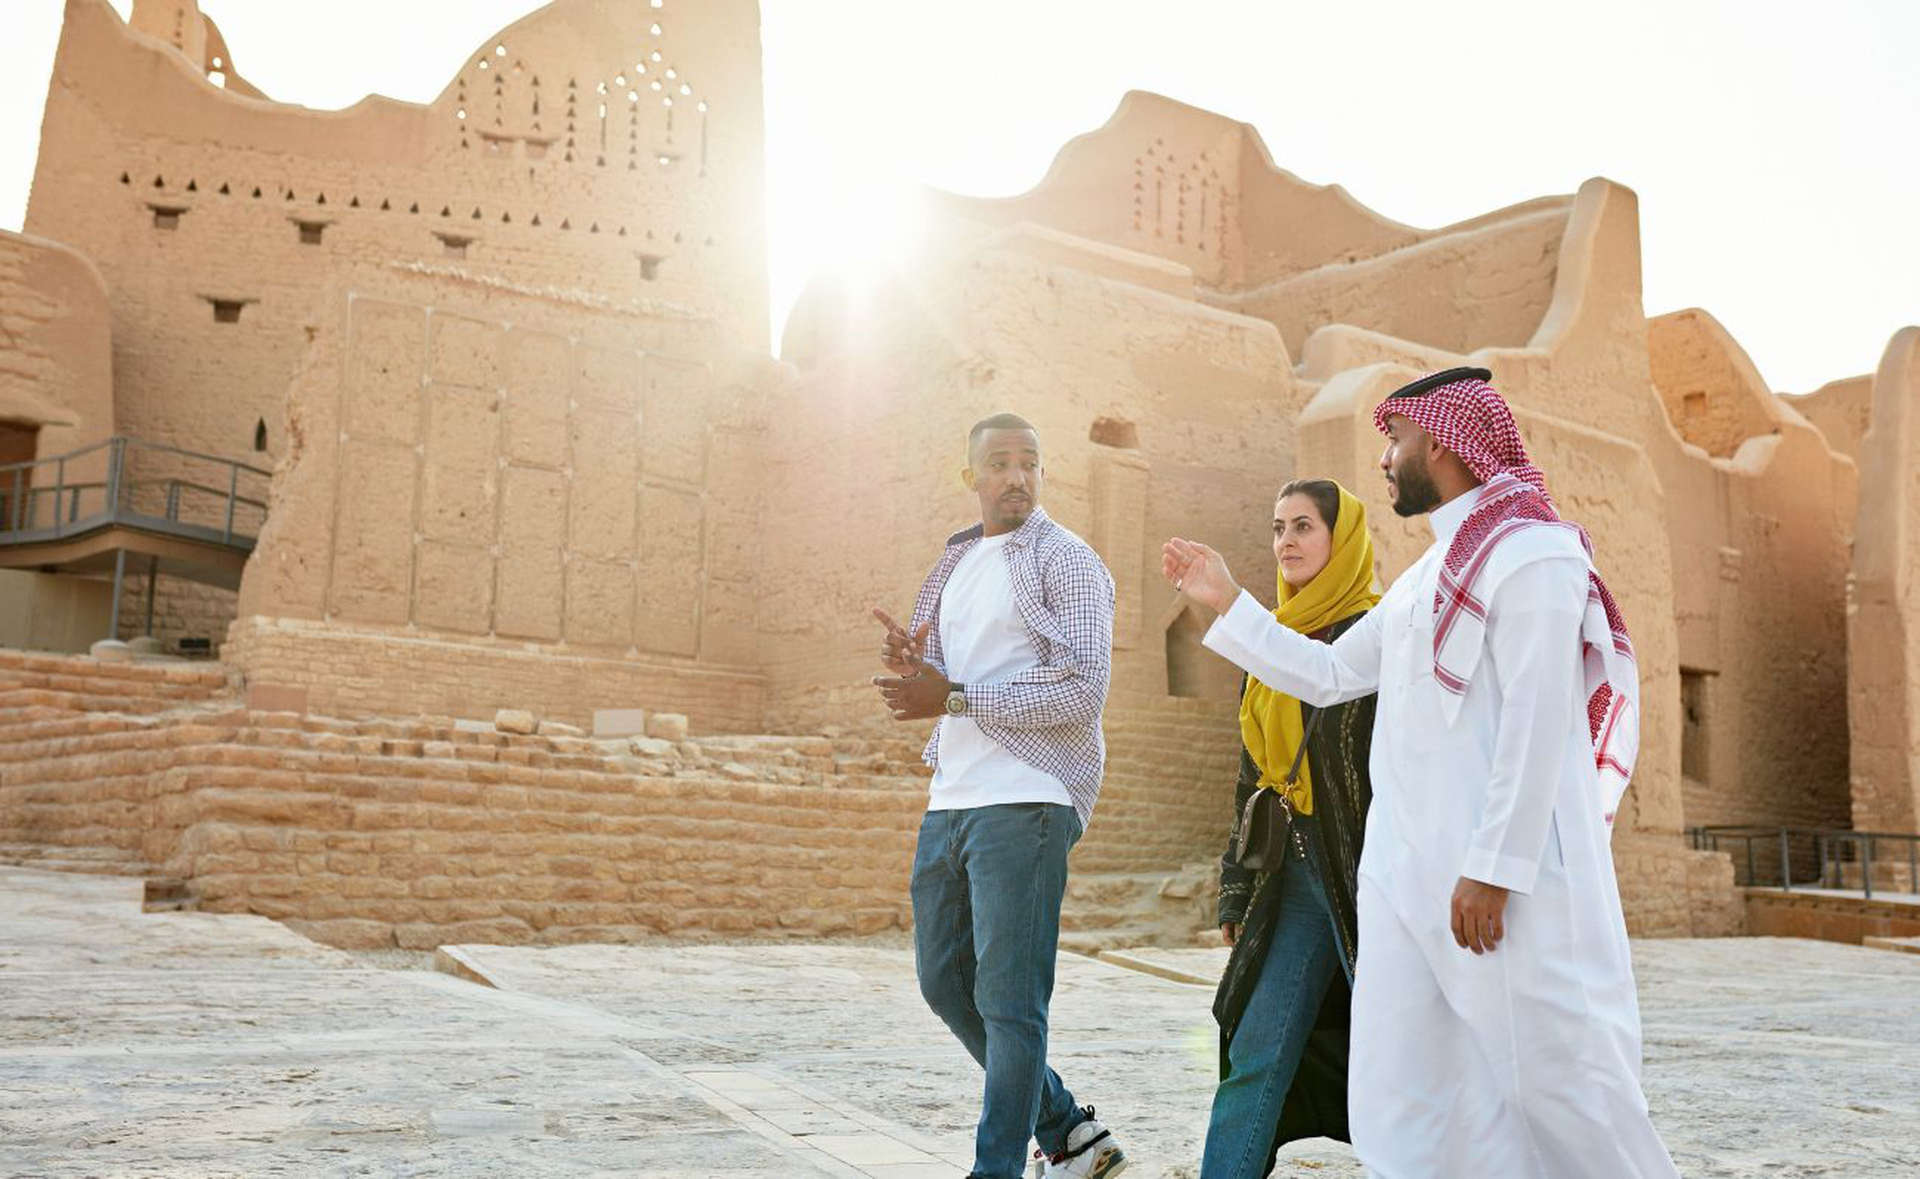 Marvel at Saudi’s traditional architectural beauty